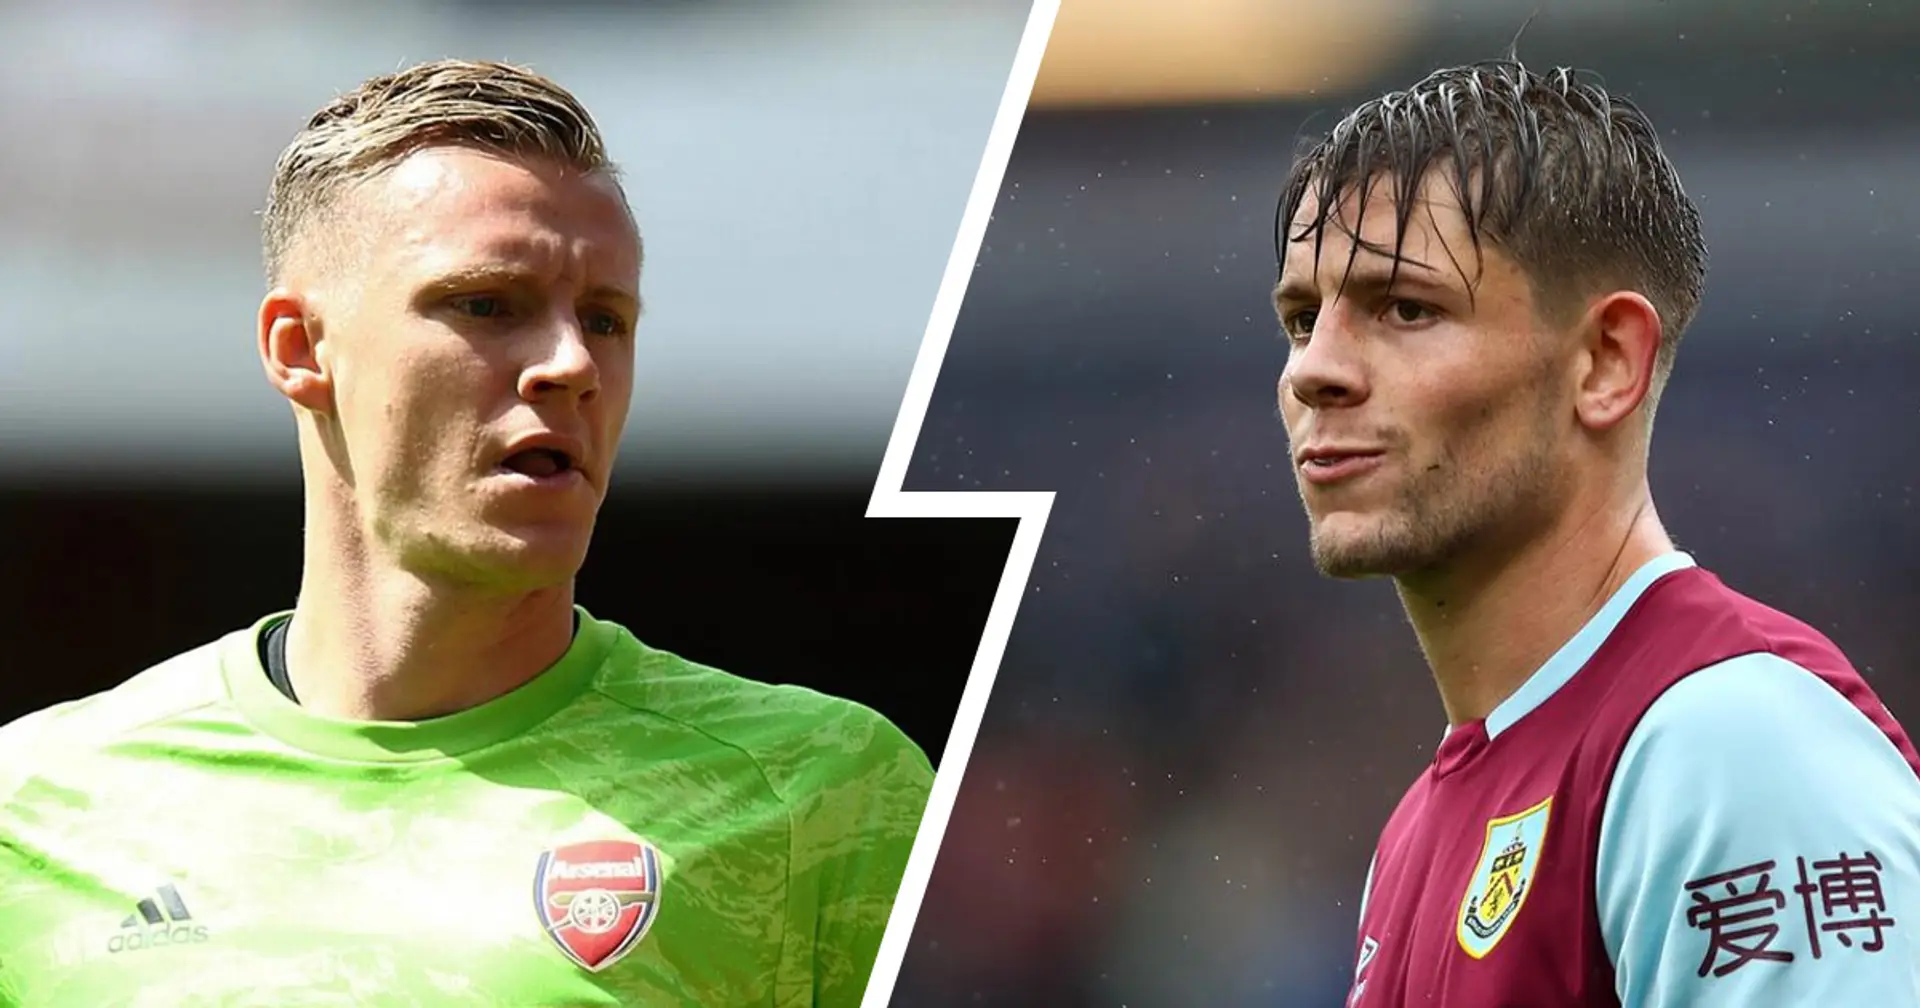 Bernd Leno, James Tarkowski and more unexpected names in statistical 2019/20 Premier League team of the season